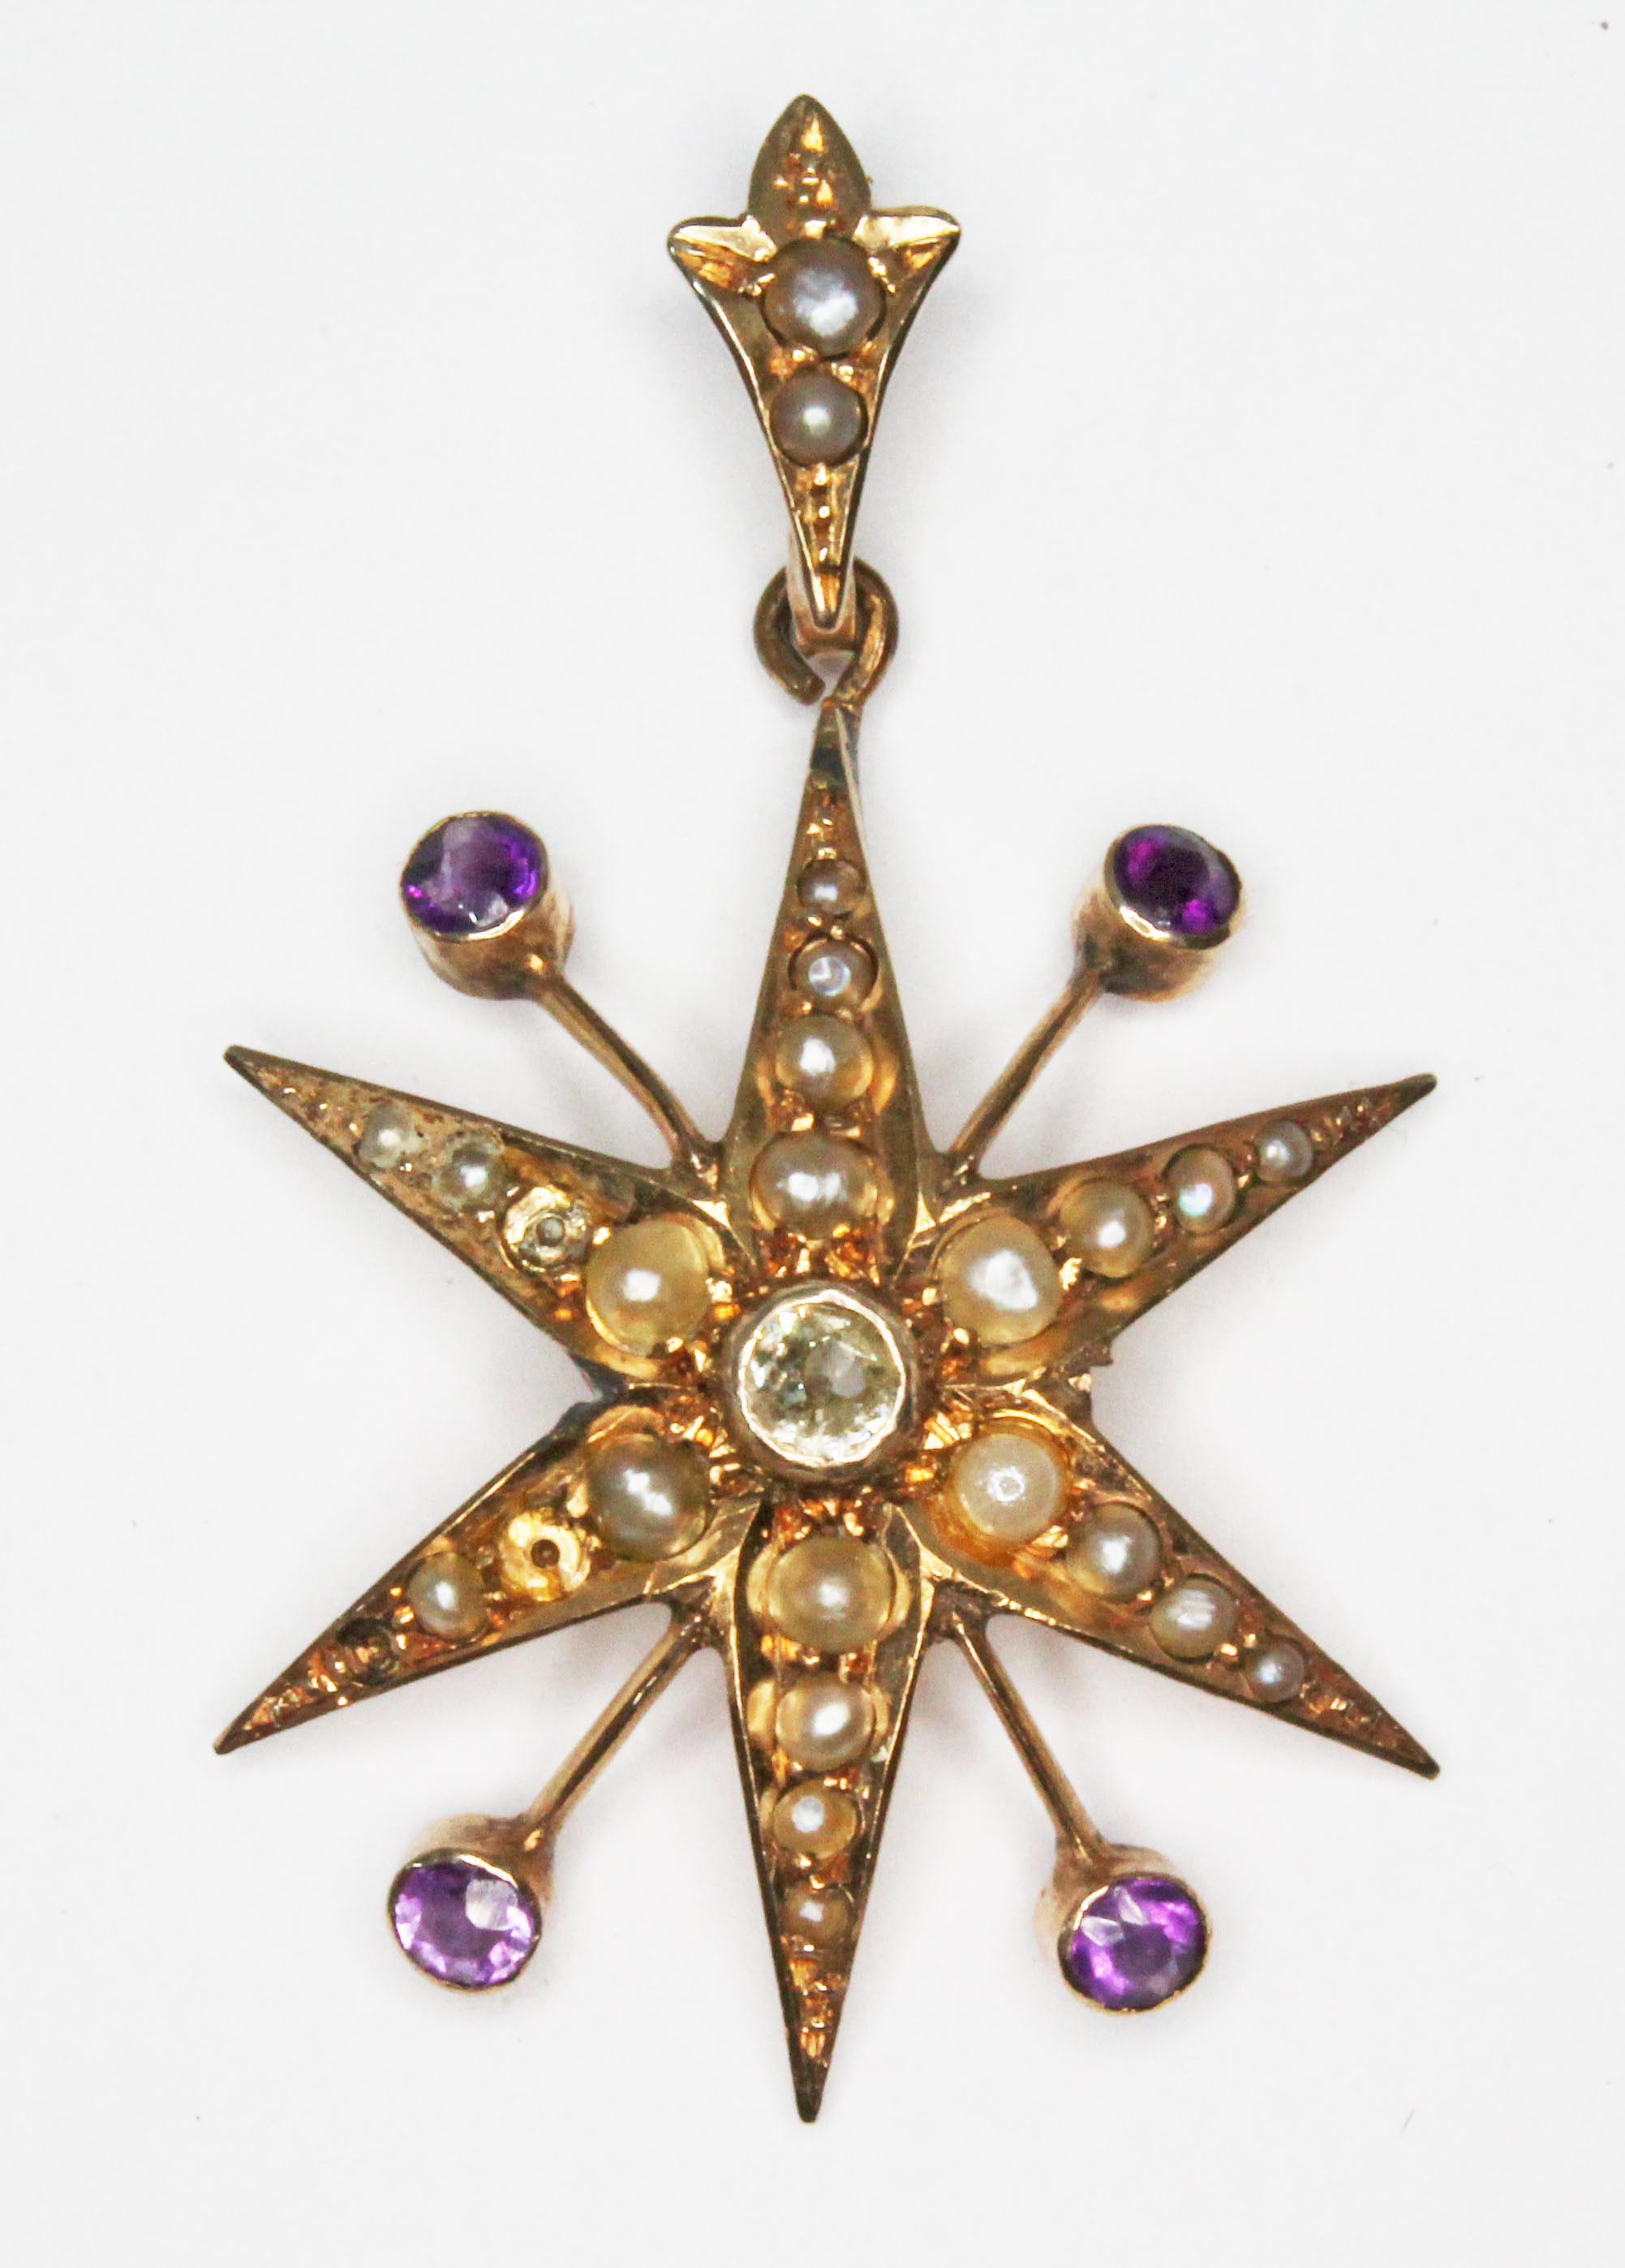 A Victorian diamond, amethyst and seed pearl pendant, the central old cut bezel set diamond weighing